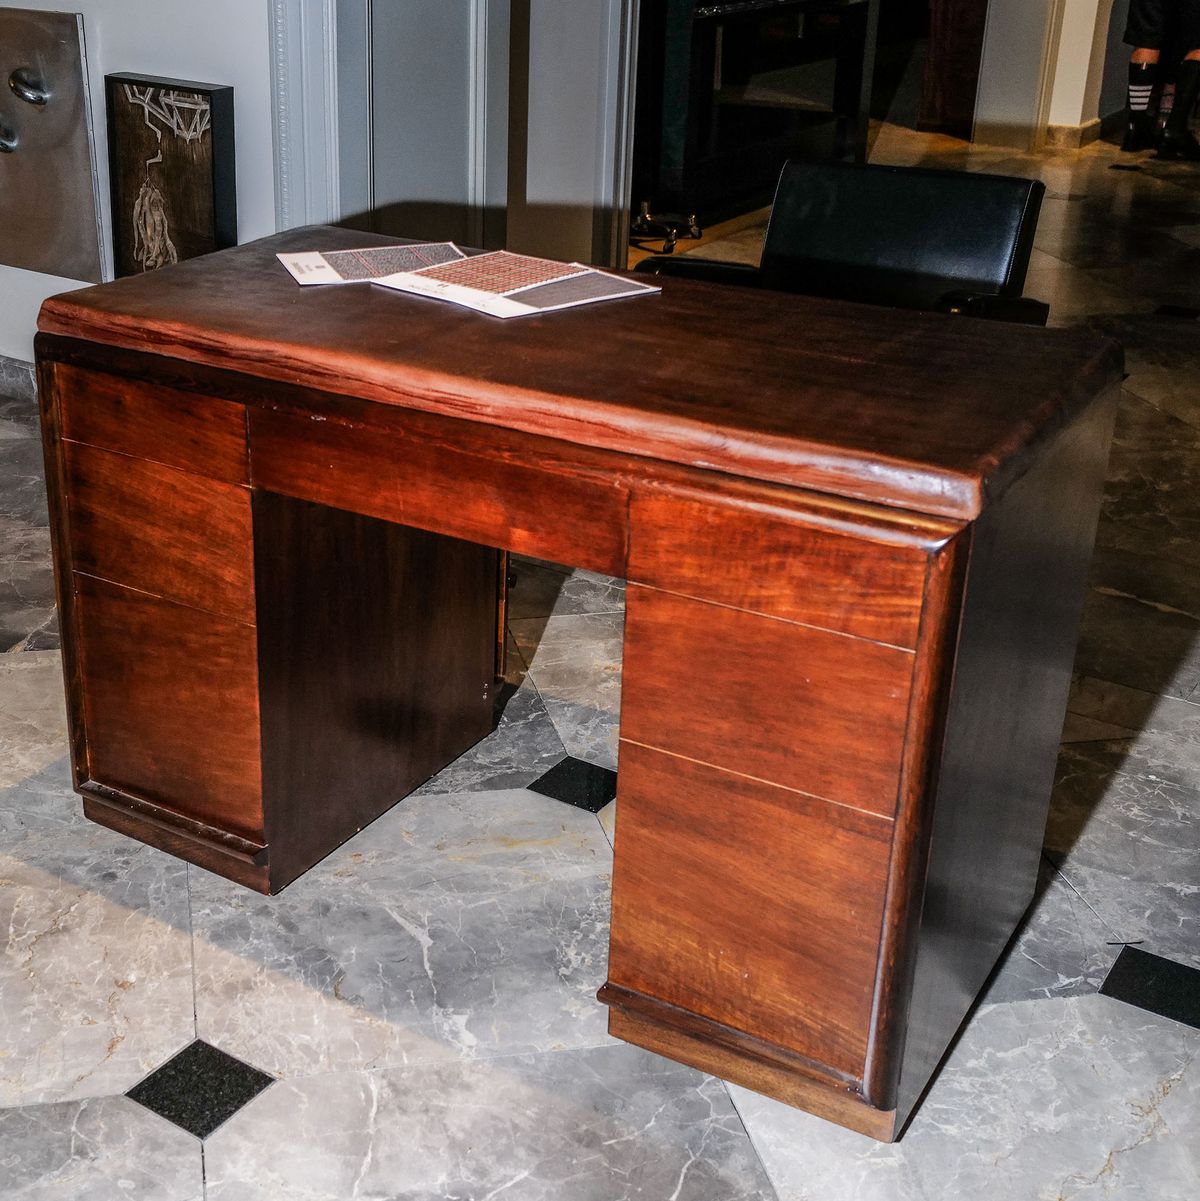 a wooden desk in a room